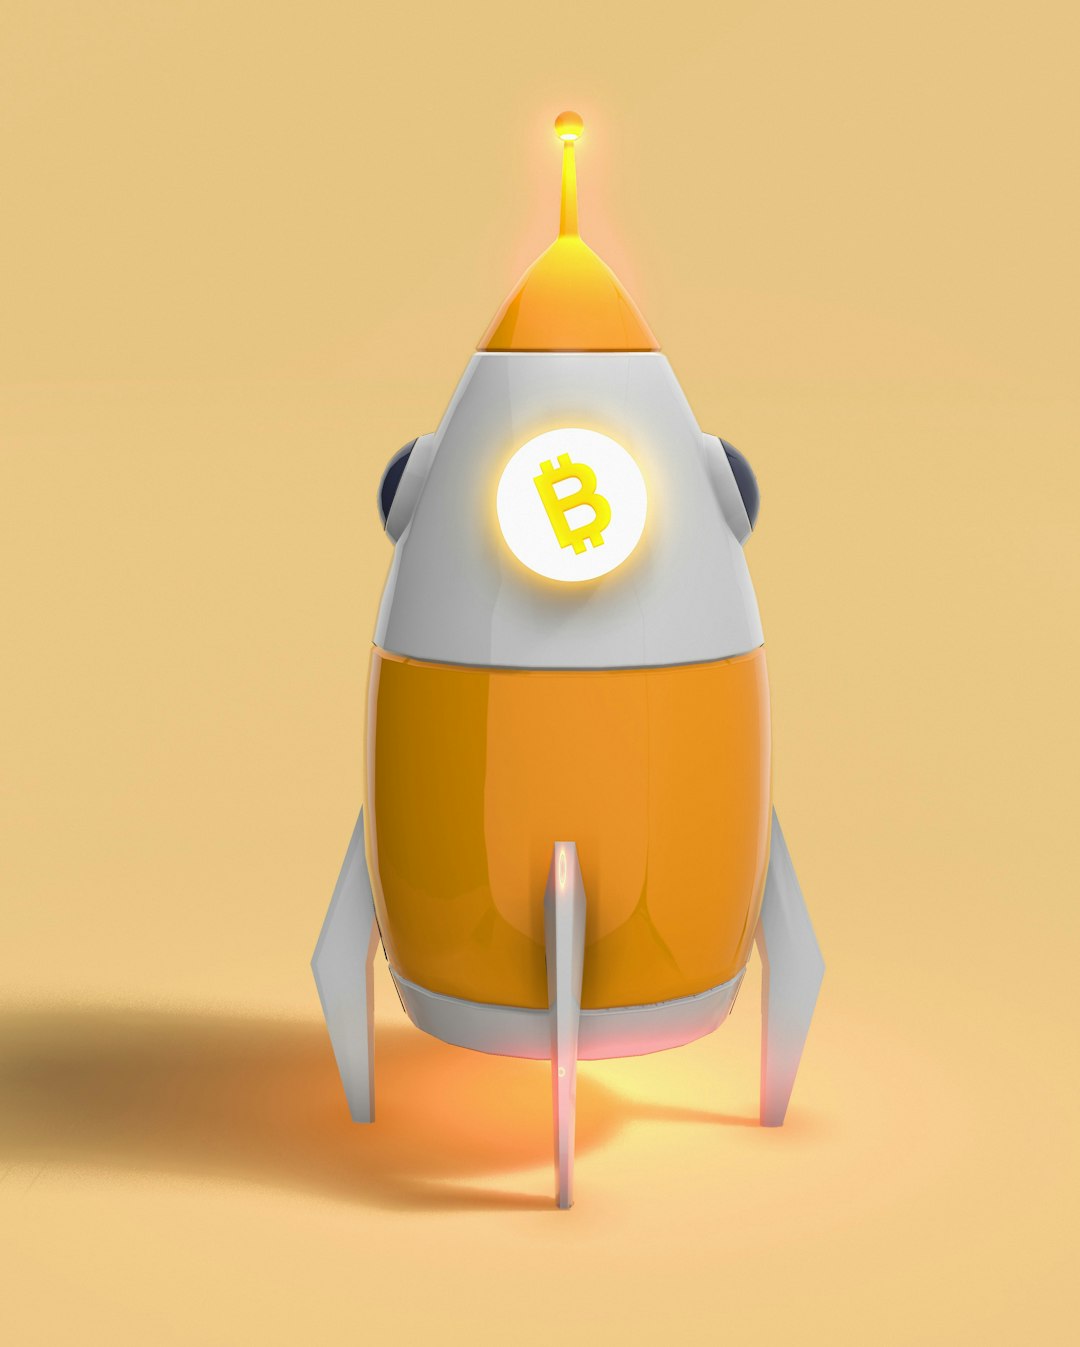 3D render of Bitcoin rocket. You can buy the transparent background version here: https://payhip.com/b/9CkW1